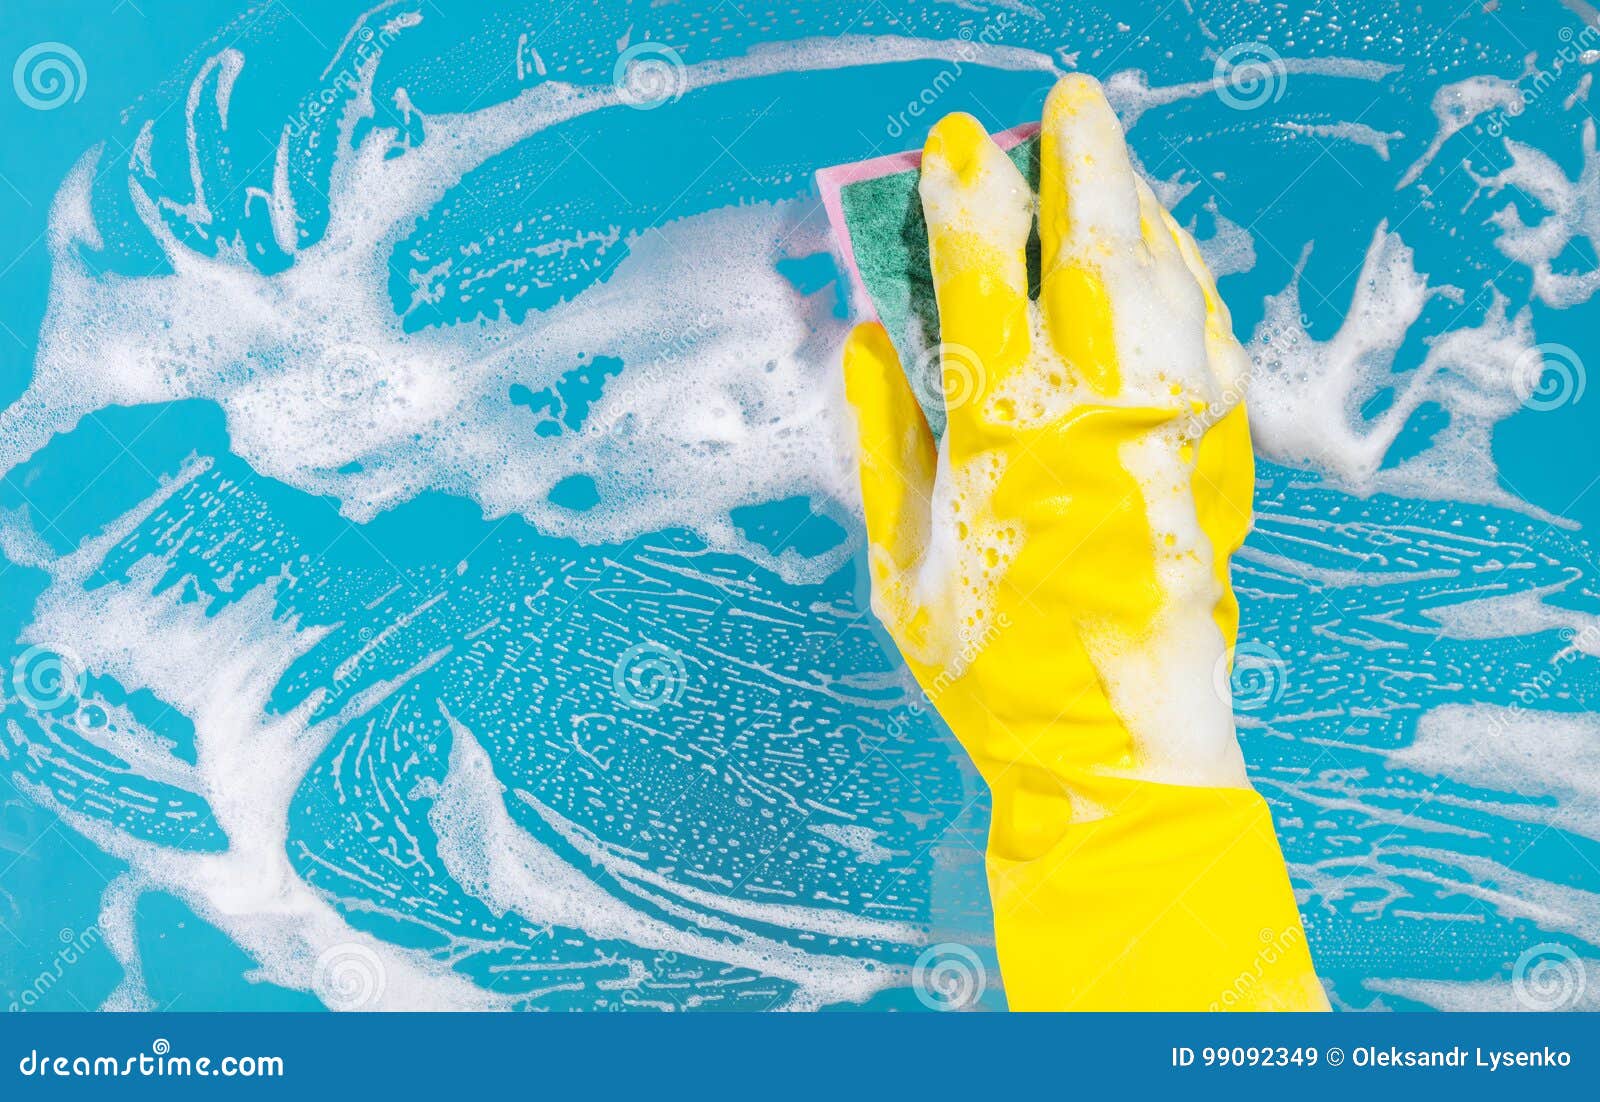 Hand Cleaning Glass Window Pane With Detergent And Wipe Or Sponge Stock Image Image Of Maid